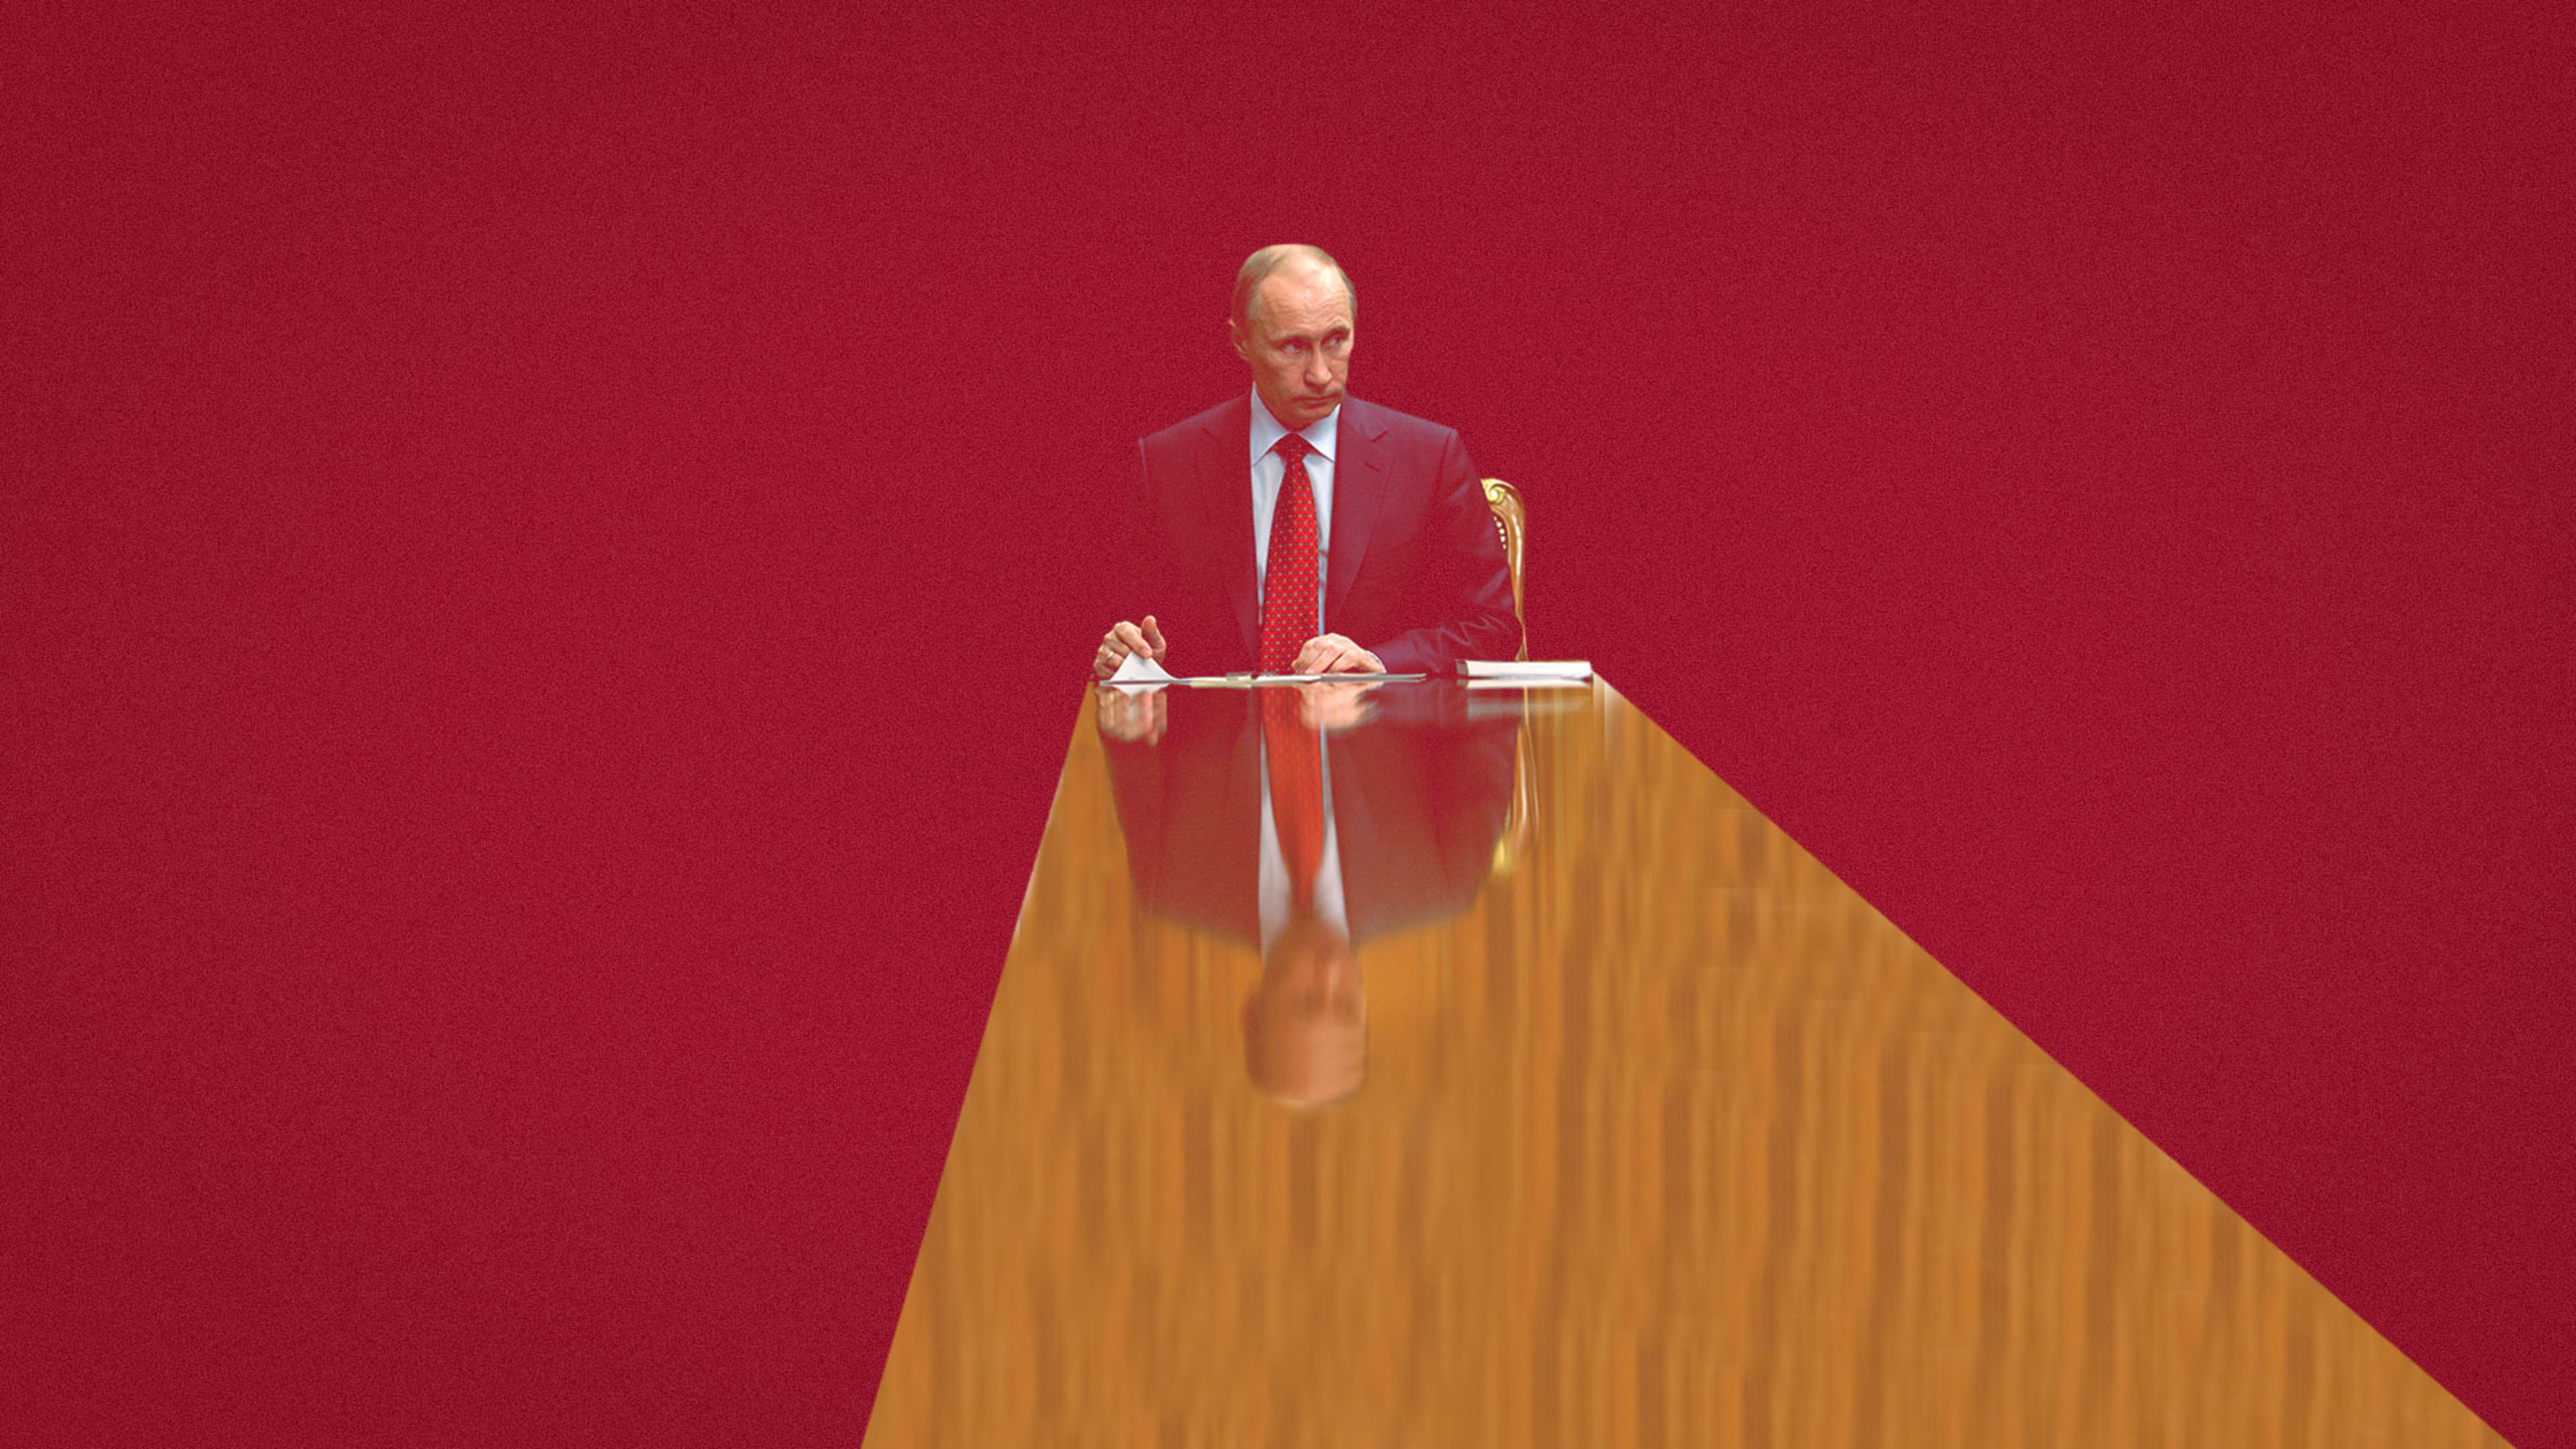 The internet is waging a meme war on Putin and his ginormous table